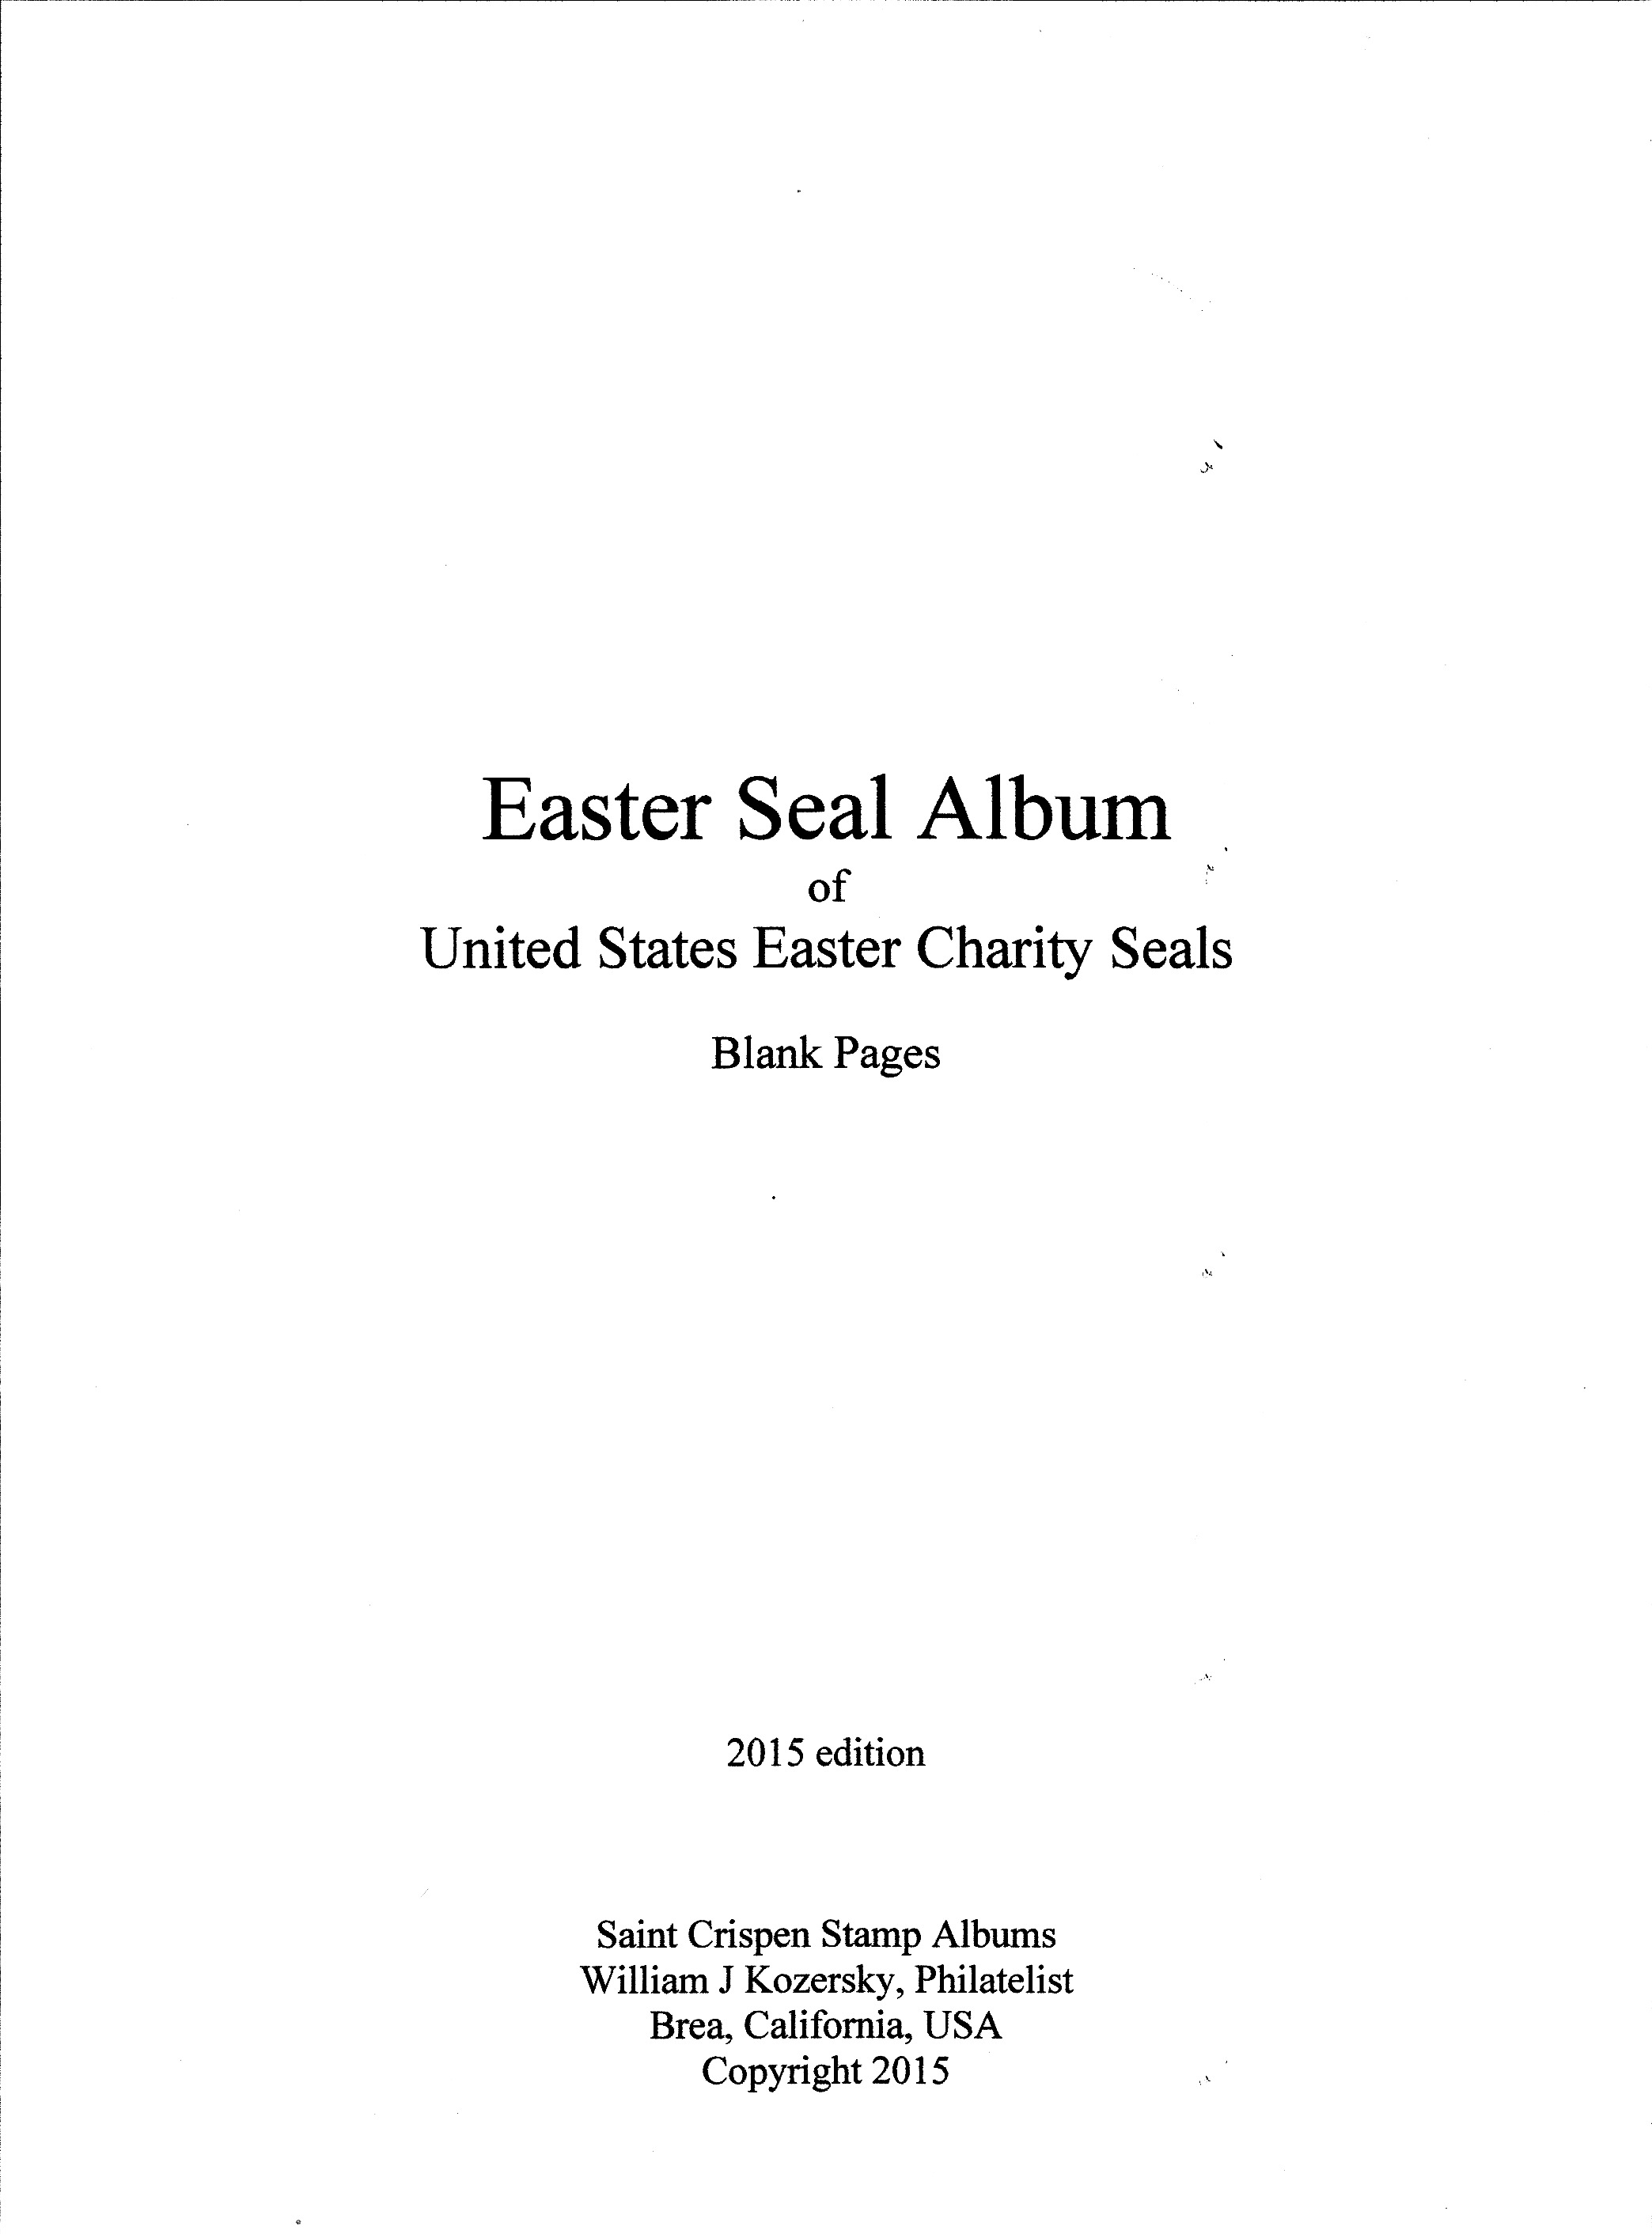  U.S. National Easter Seal Album Pages, blank pages with title and border